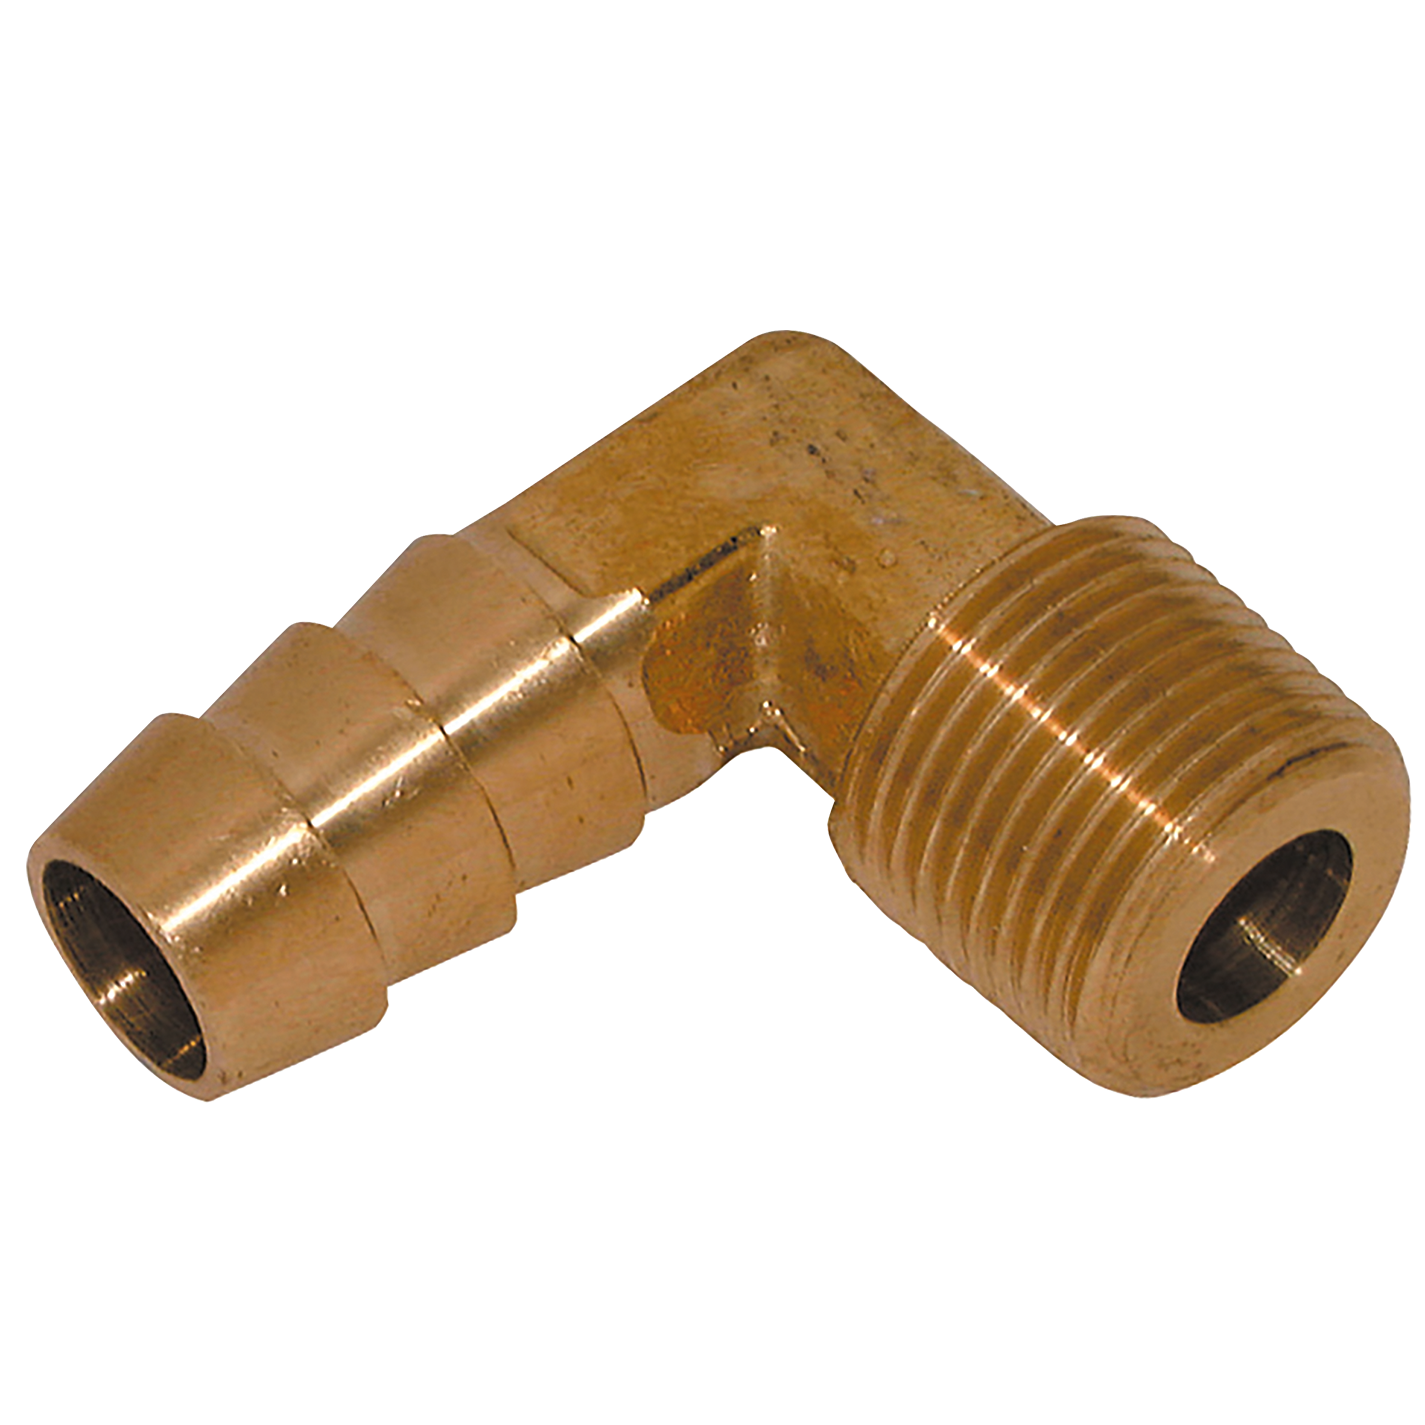 1/8" BSPT Male Elbow Hose Tails, Brass